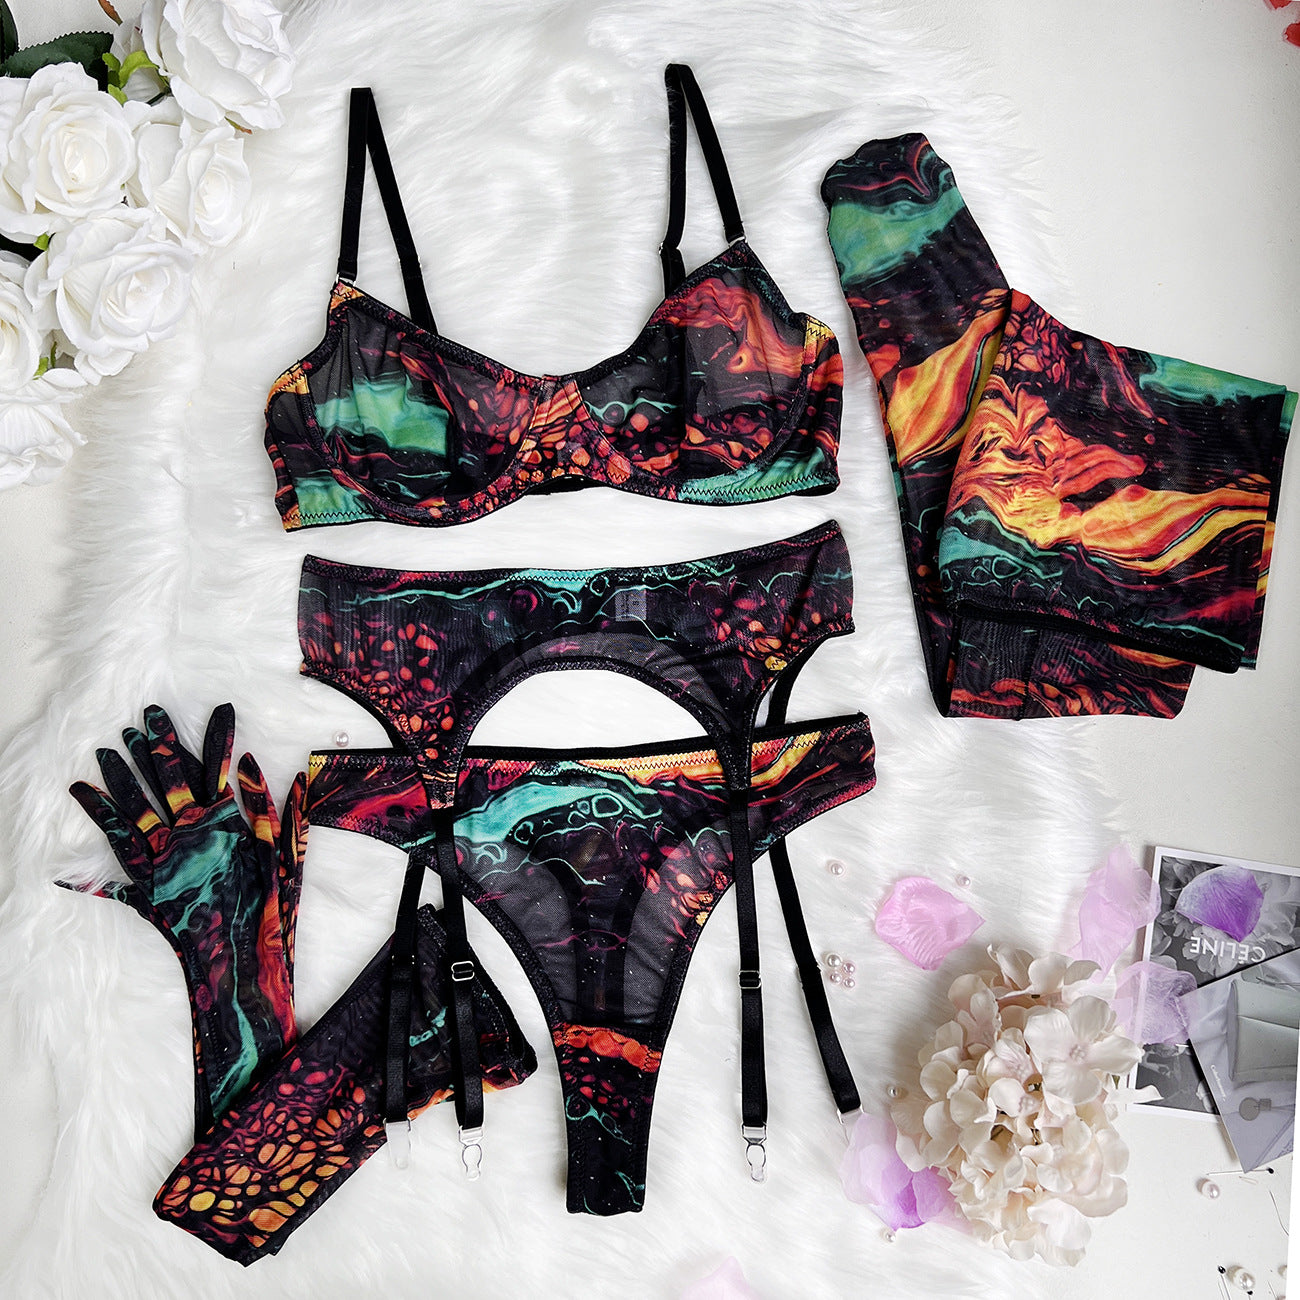 Watercolor Muse Sheer Mesh Lingerie Ensemble with Matching Accessories